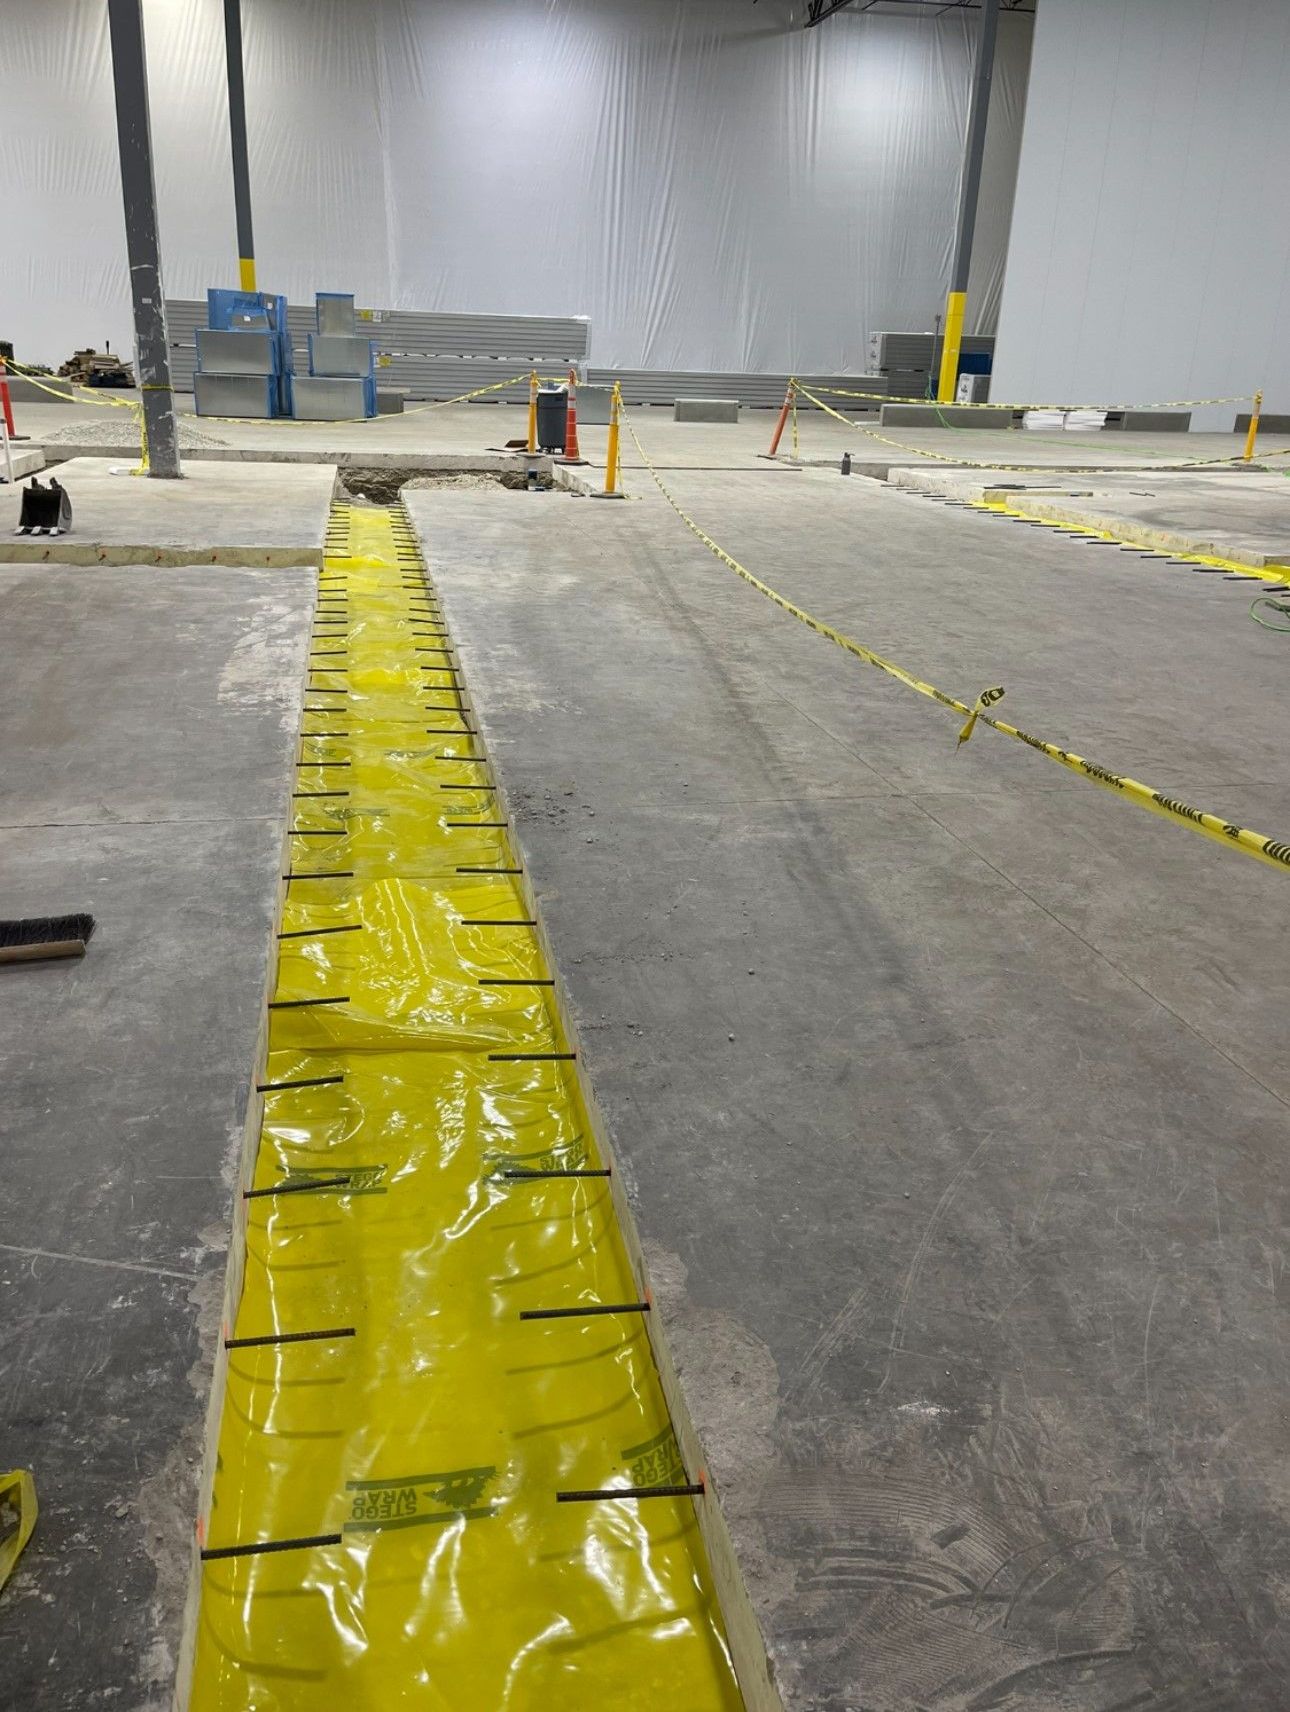 A large warehouse with a lot of yellow tape on the floor.